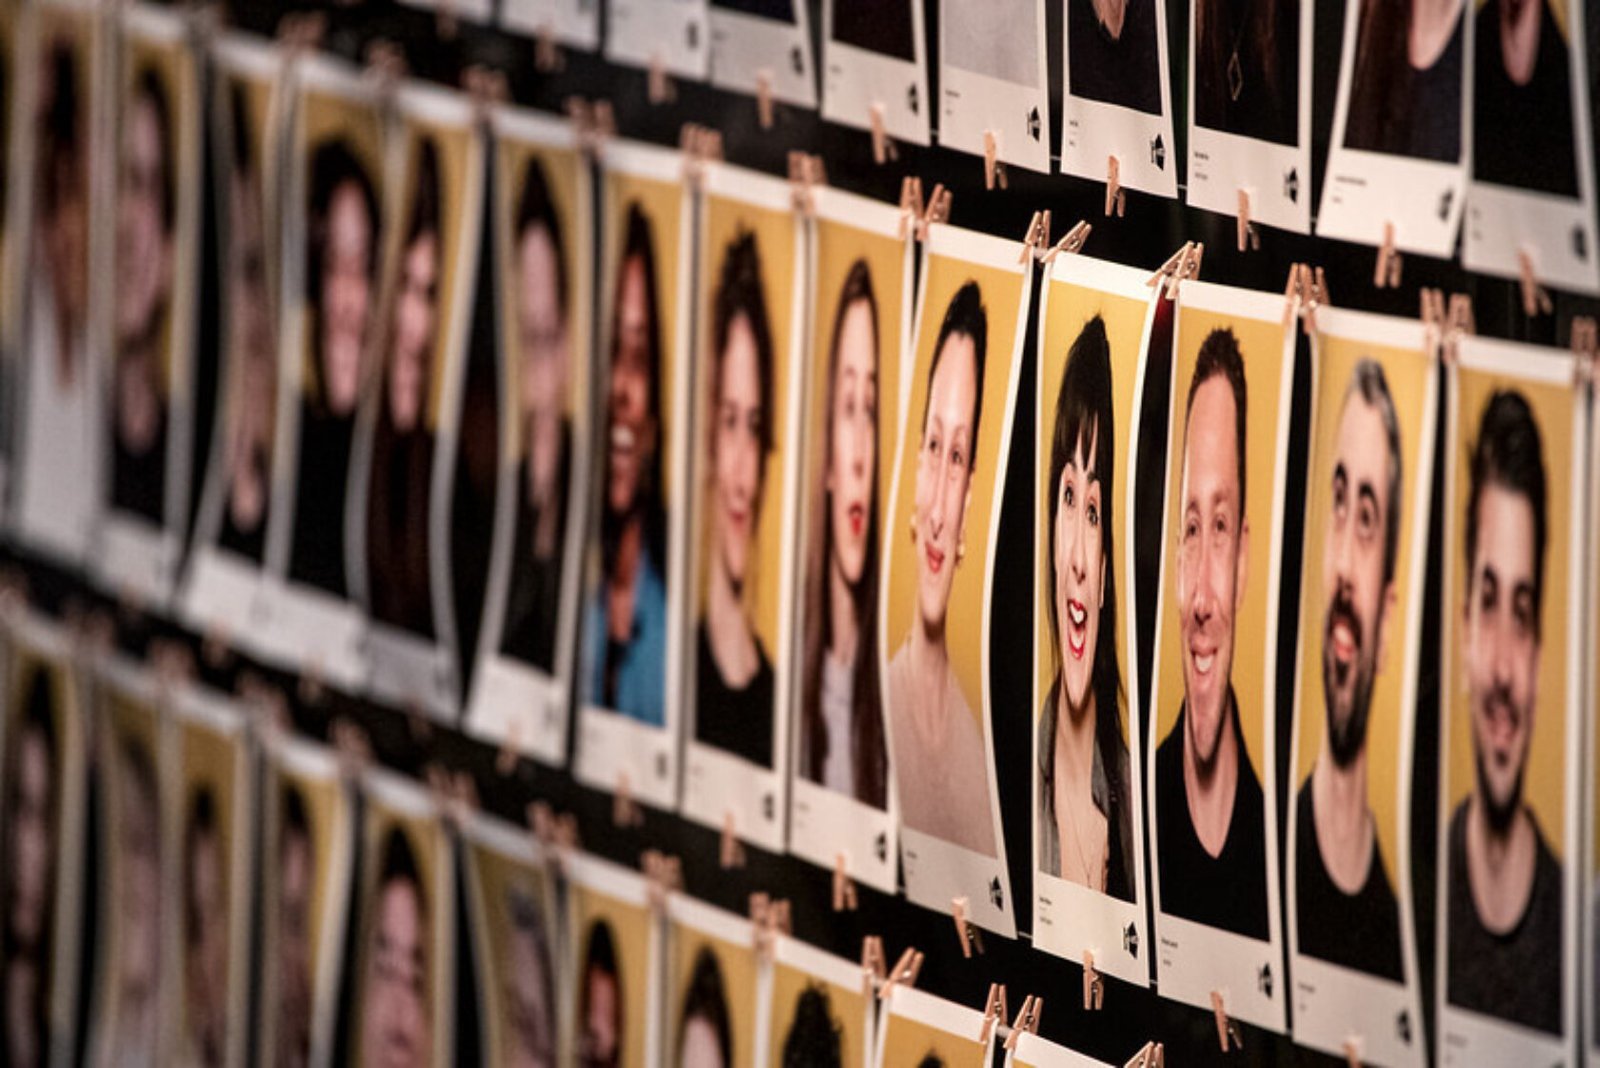 Rows of photographs with people's faces